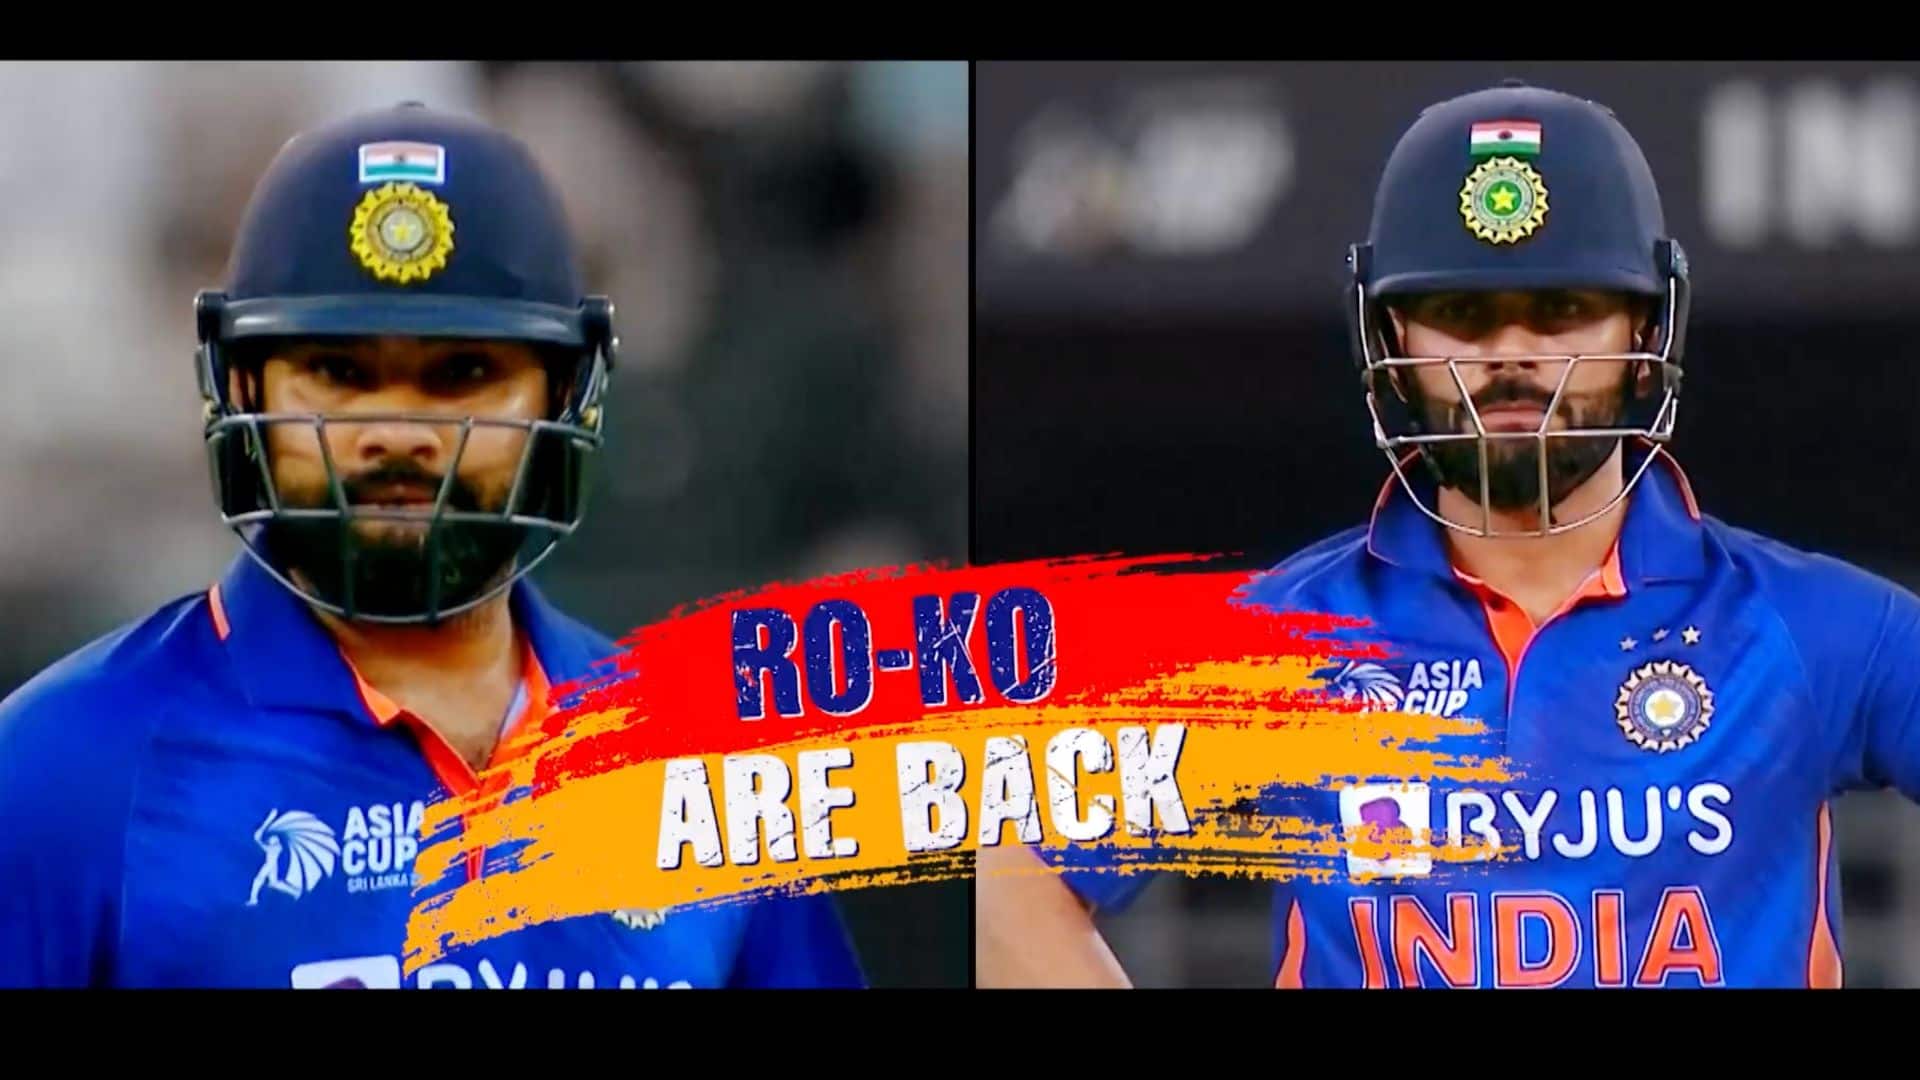 [Watch] Rohit-Virat Ready For IND vs PAK As Broadcasters Share New 'RO-KO' Promo